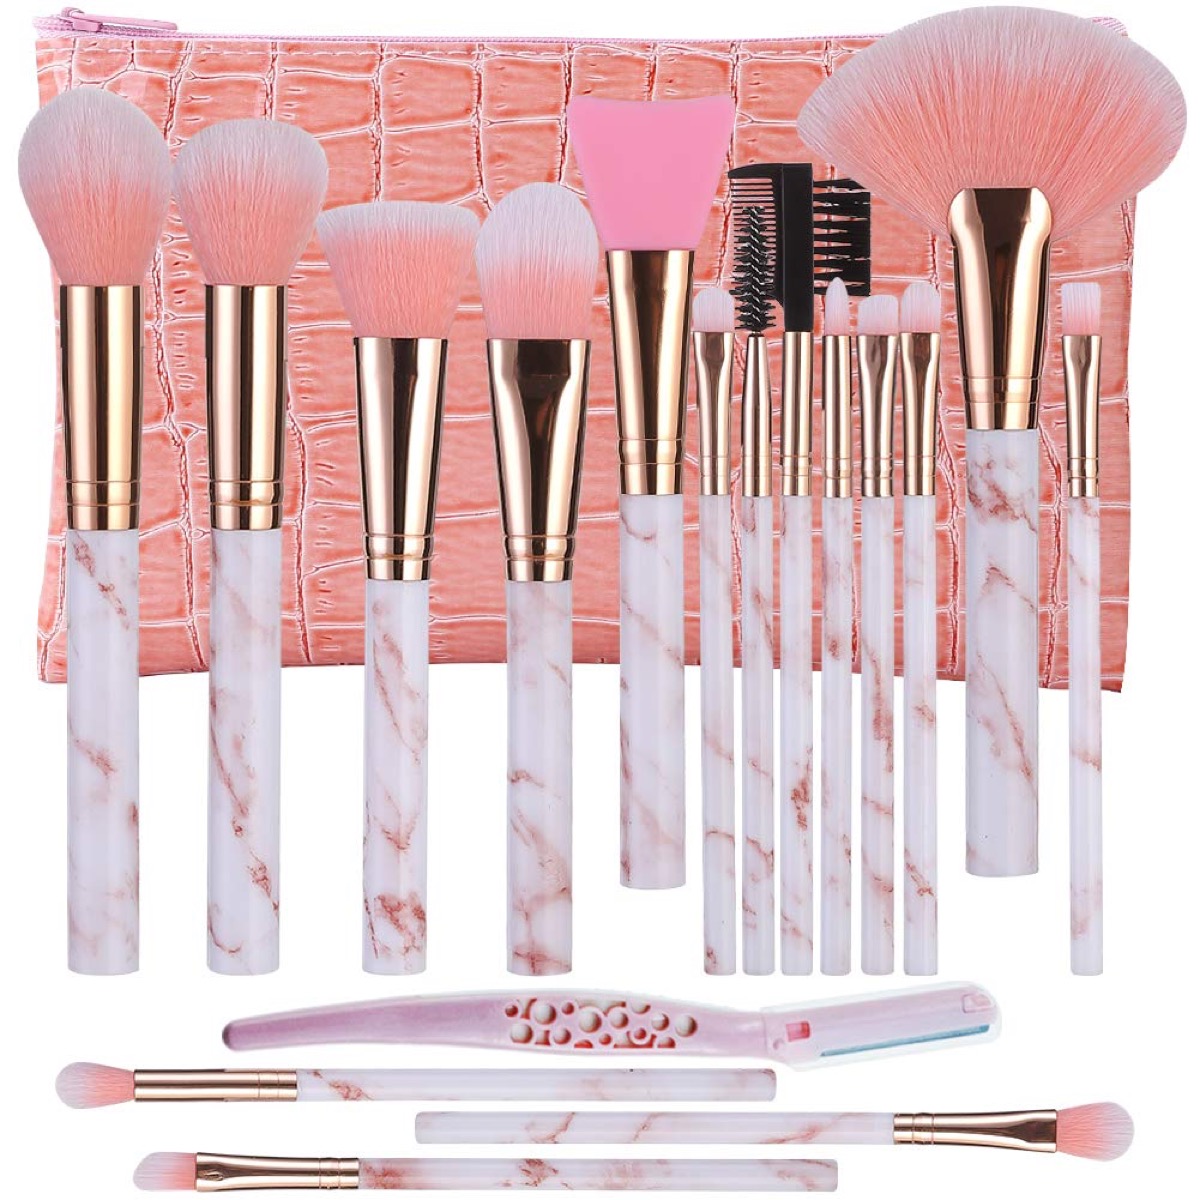 pink makeup brushes with faux marble handles and pink faux crocodile case